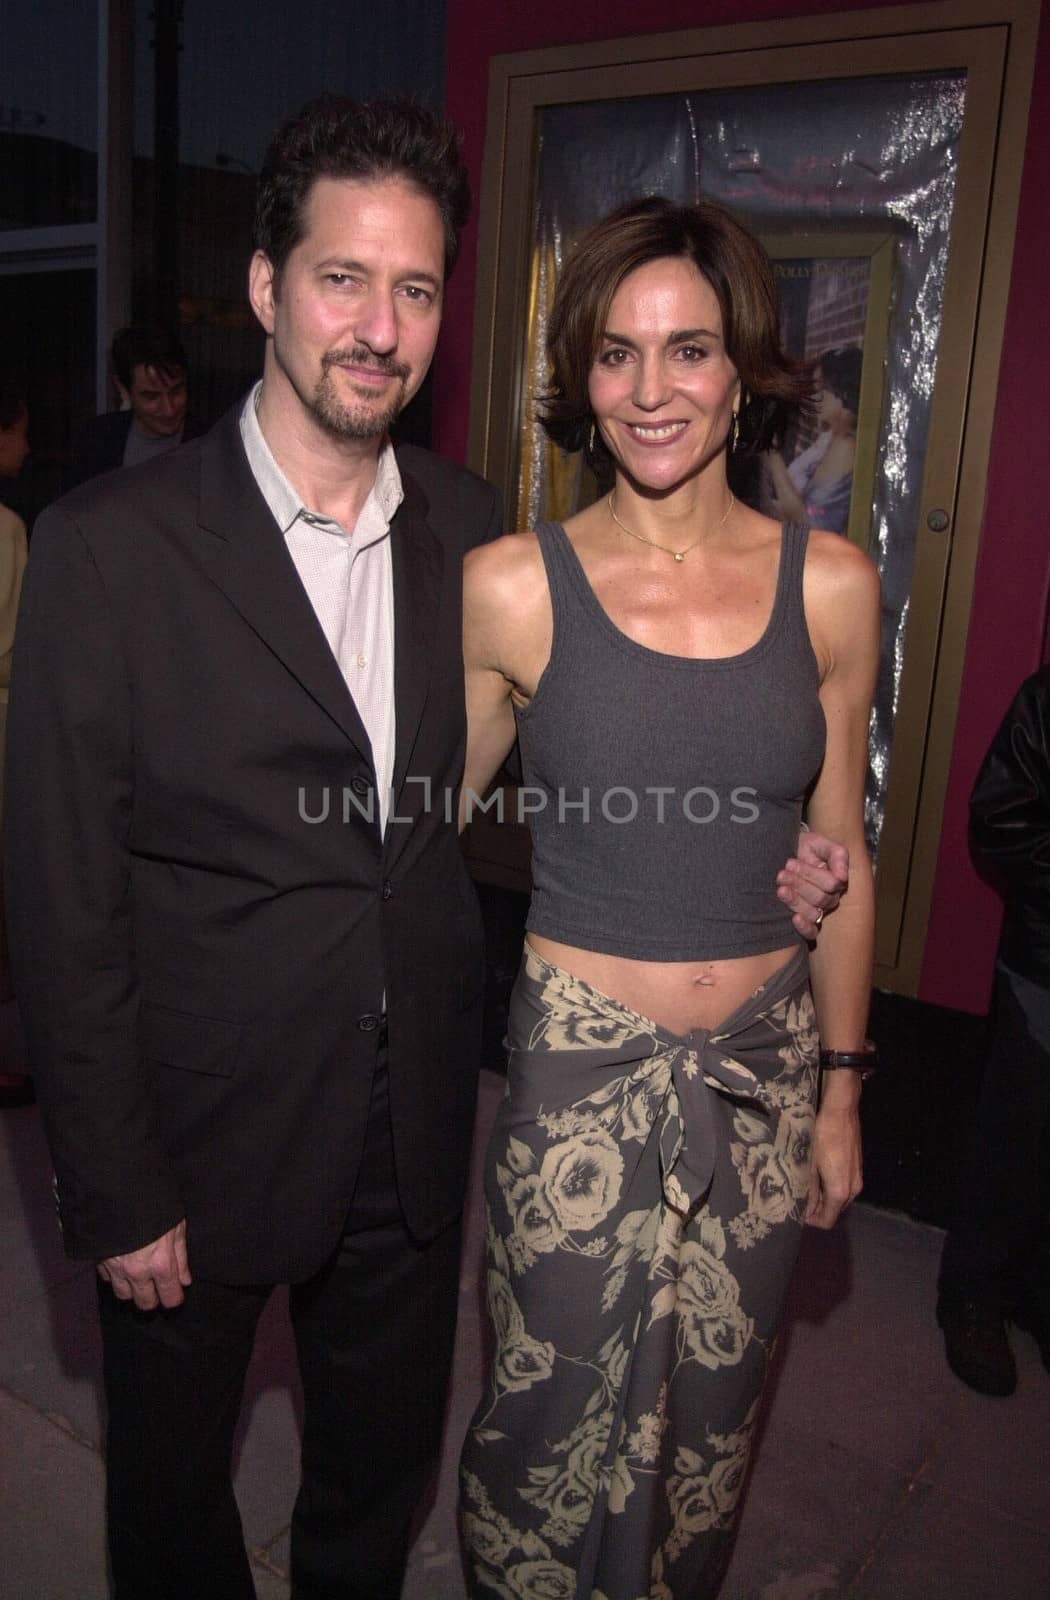 Polly Draper and Husband at the premiere of "The Tic Code" in Los Angeles. 08-02-00